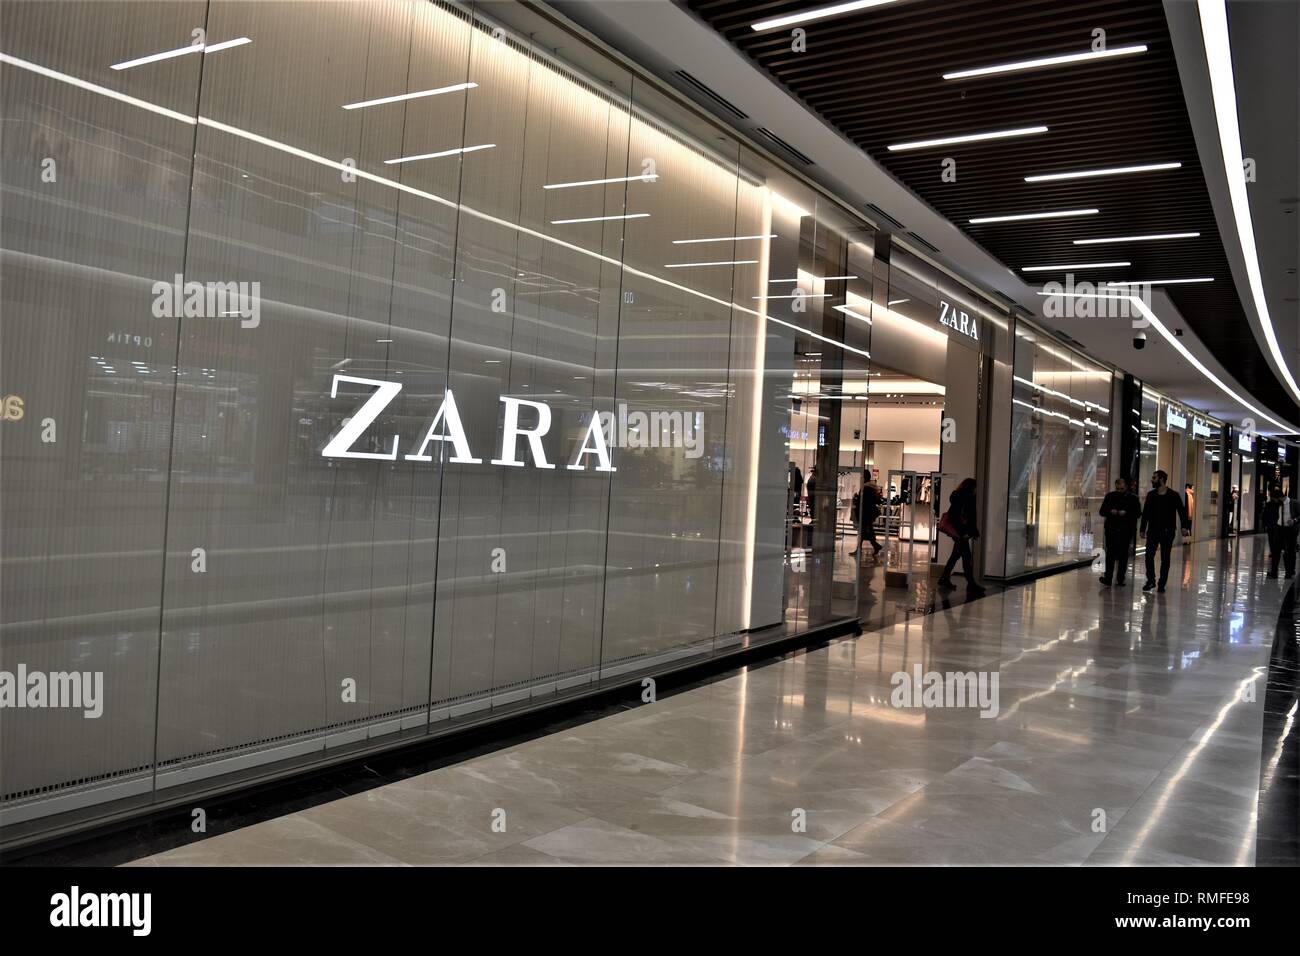 Ankara, Turkey. 14th Feb, 2019. Shoppers walk past a Zara clothing store in  a shopping mall. Zara is the main brand of the Inditex group, one of the  world's largest apparel retailer.